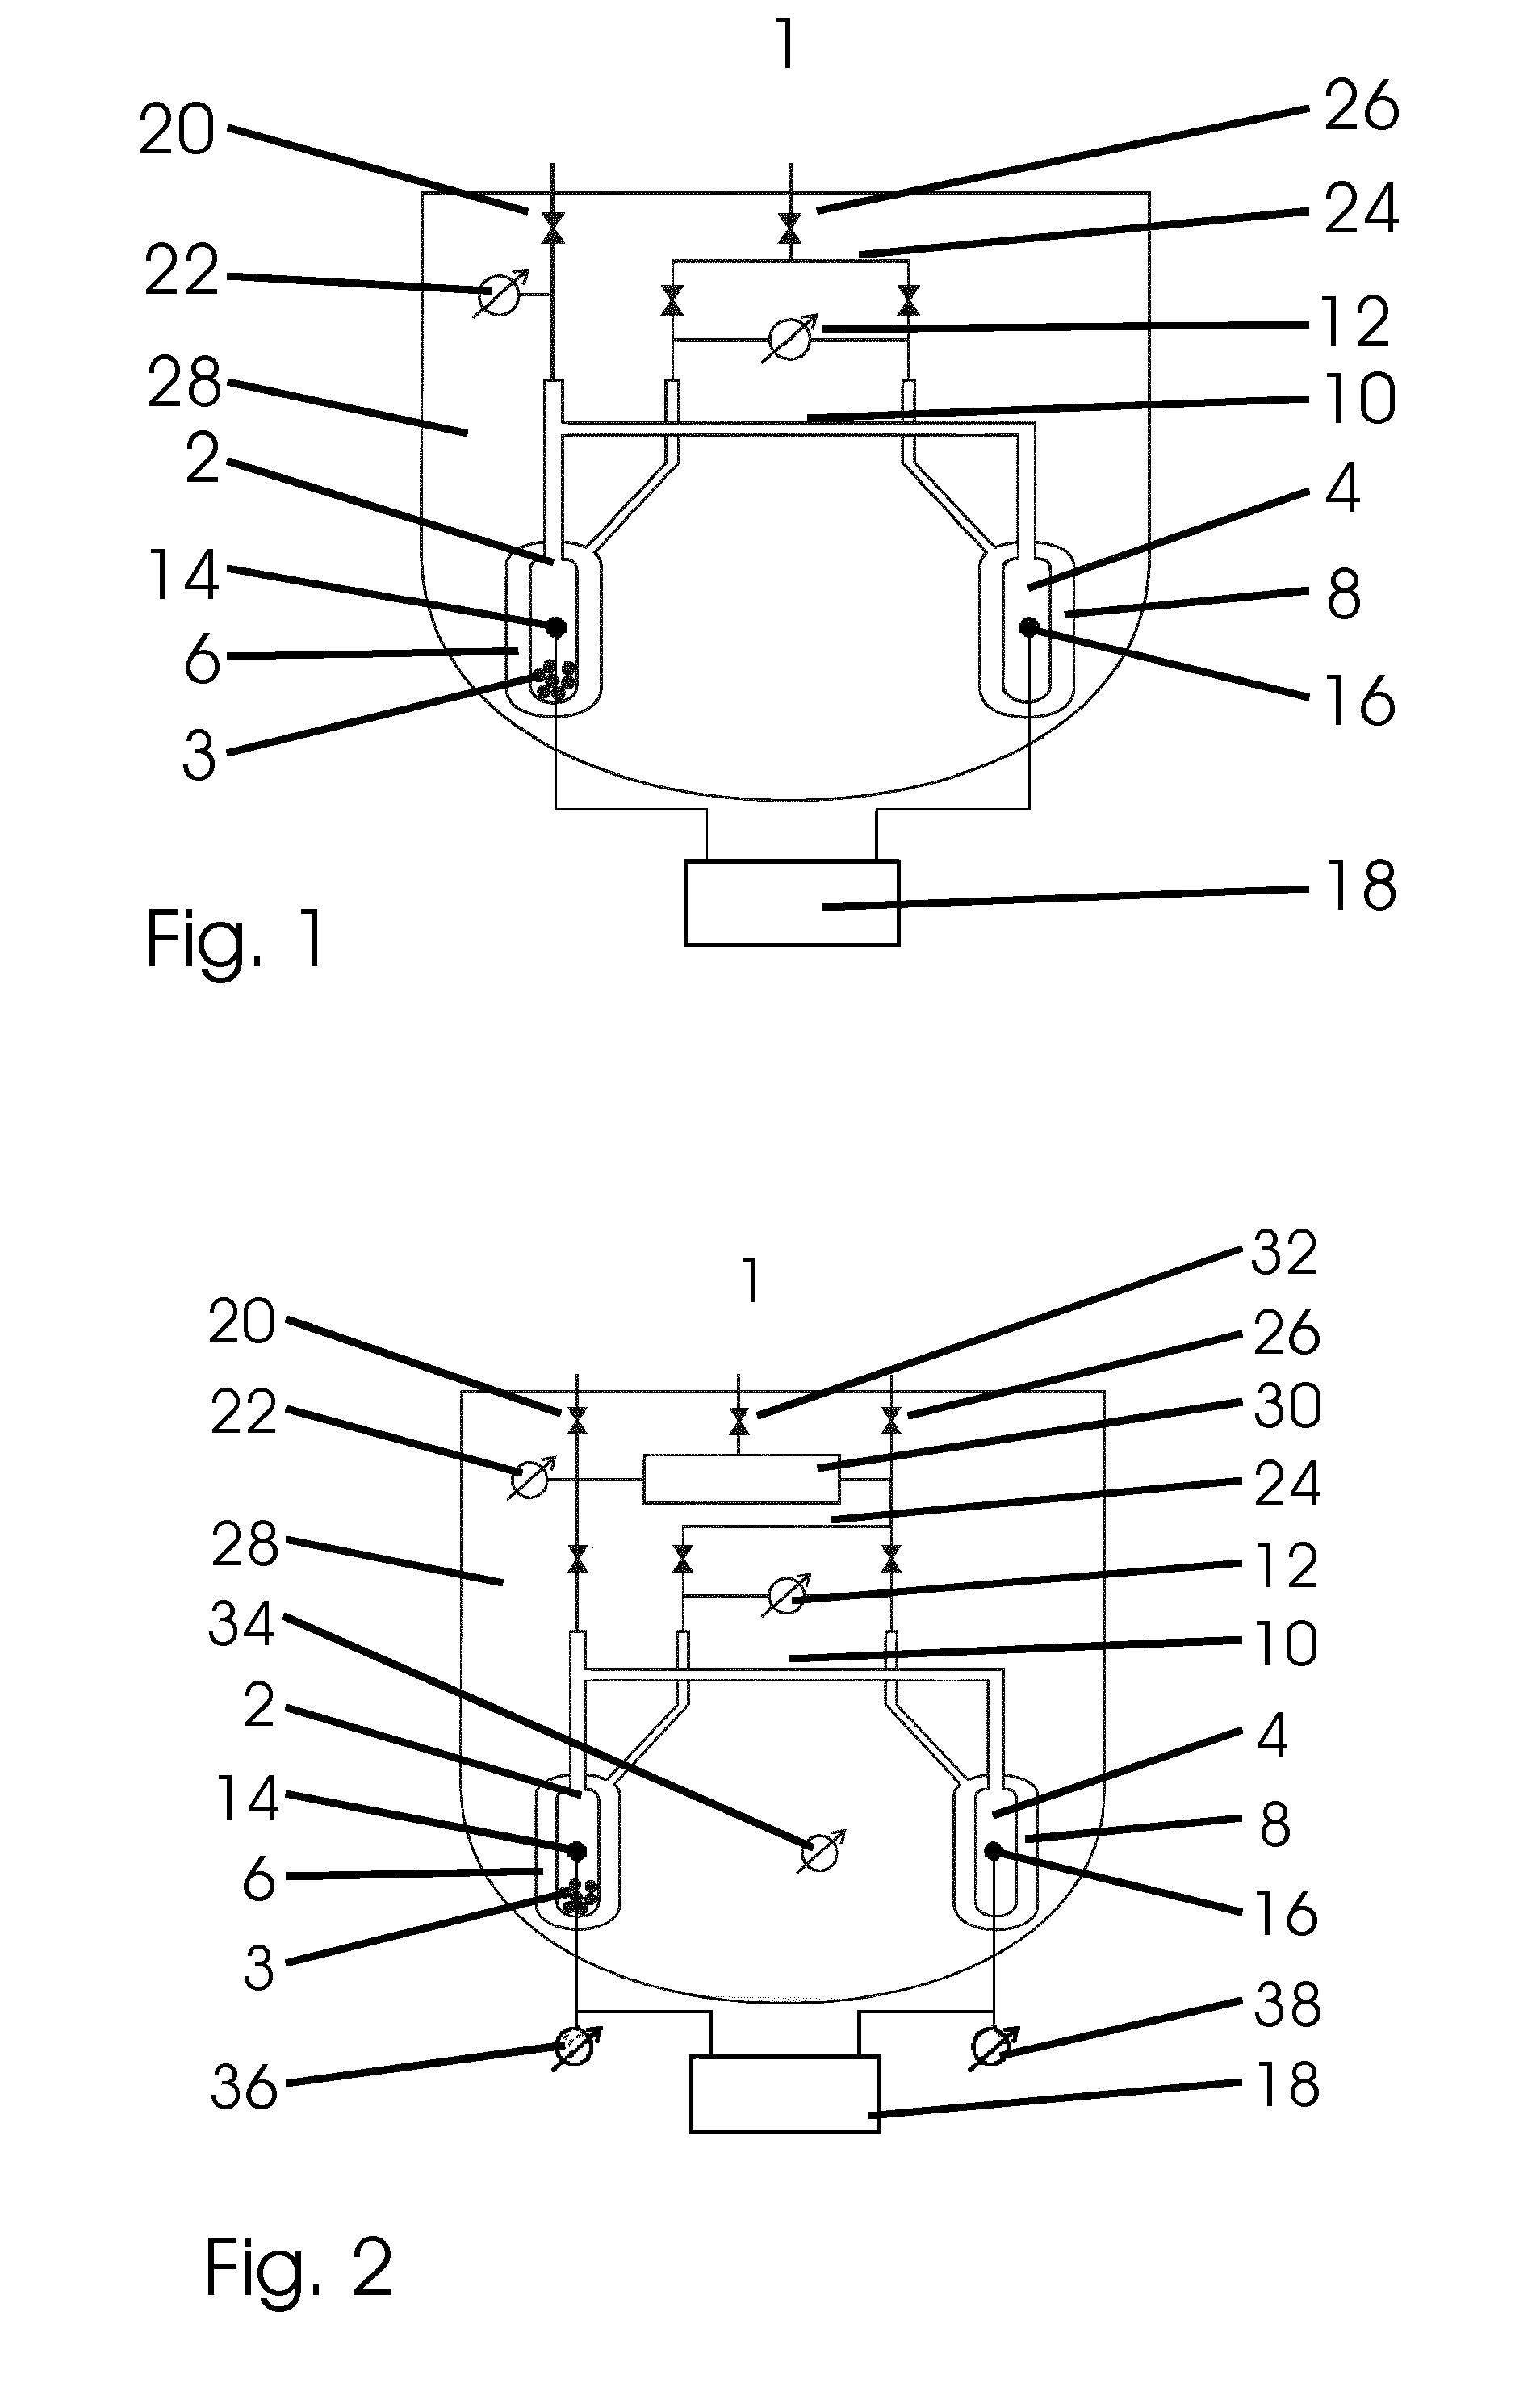 Device and Method for Calorimetrically Measuring Sorption Processes